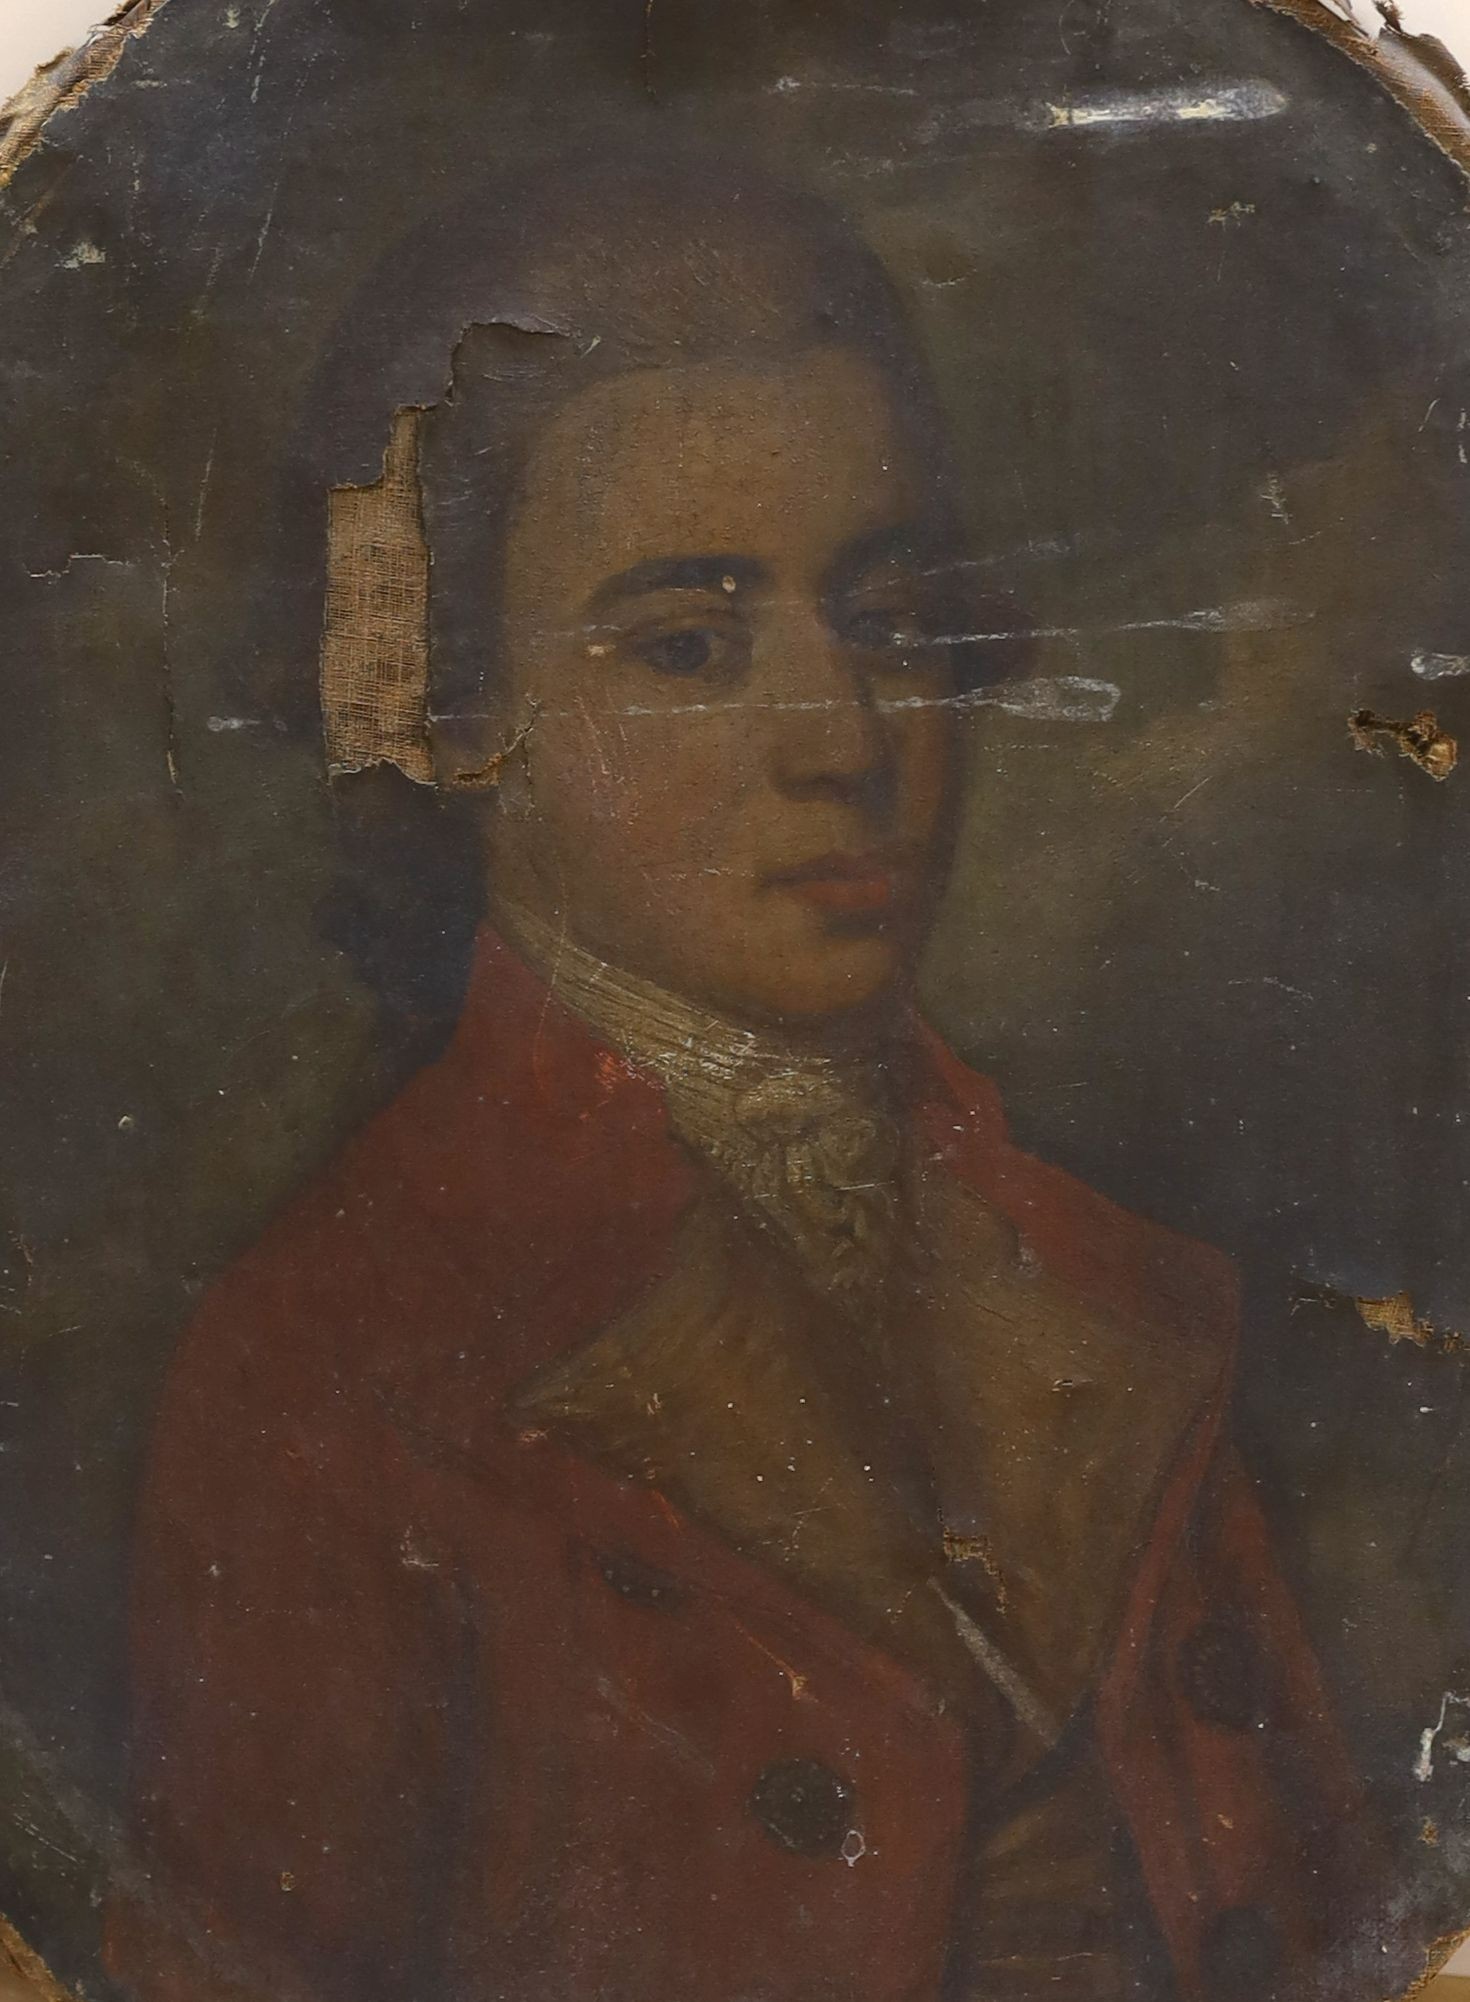 Late 18th century English School, oil on canvas, Portrait of a gentleman wearing a red coat, oval, 65 x 54cm, unframed (a.f.)